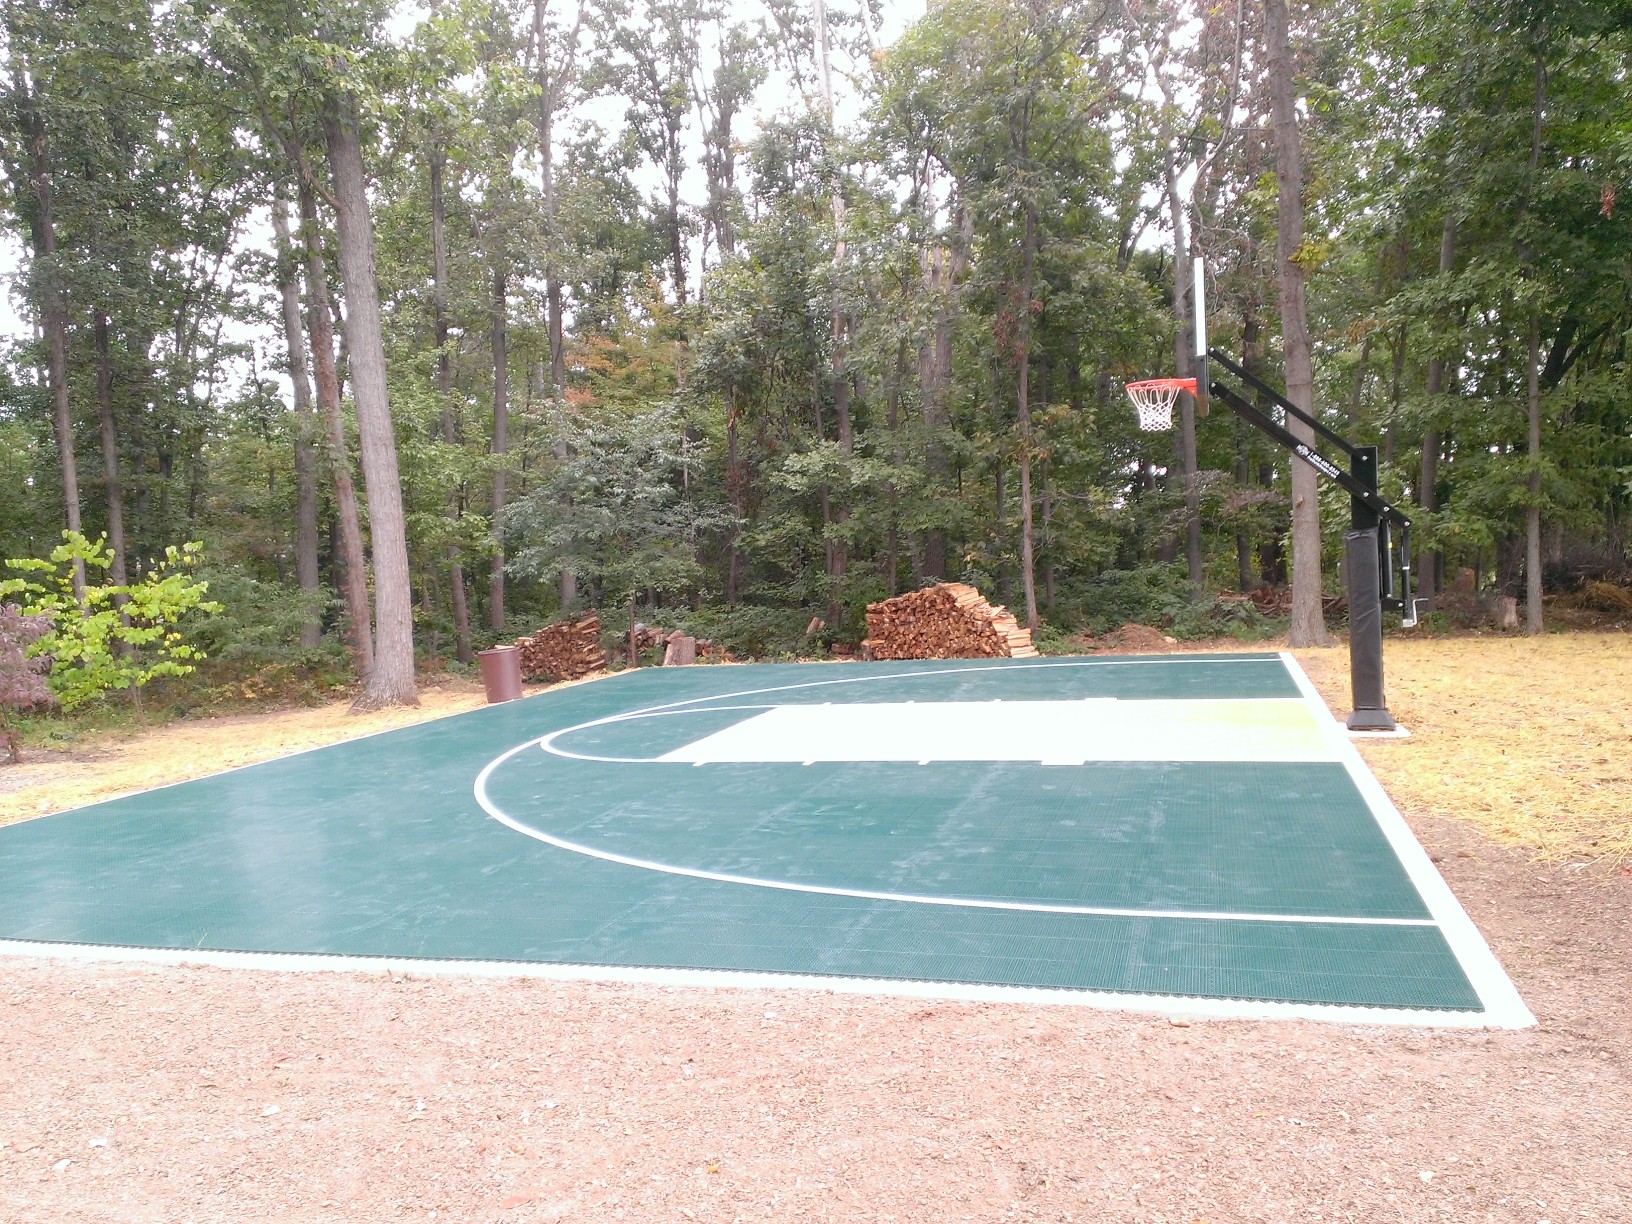 There is a side view of the court.